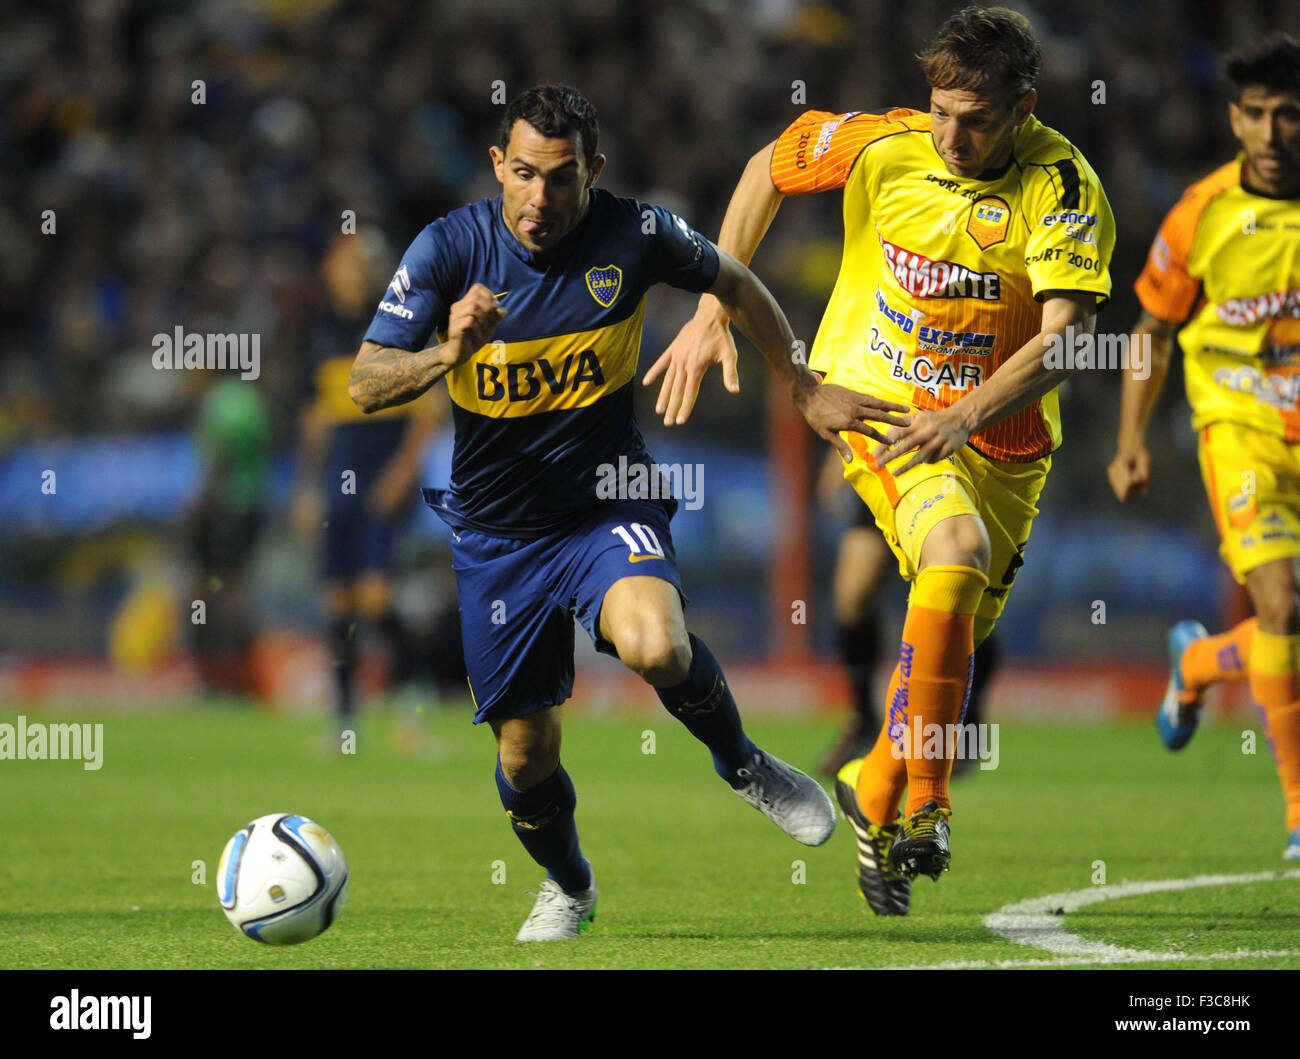 Buenos Aires, Argentina. 4th Oct, 2015. Boca Juniors' Carlos Tevez (L) vies for the ball with Gabriel Tomassini (R), of Crucero del Norte during a match of the Argentinean First Division, held in the Alberto J. Armando Stadium, in Buenos Aires, Argentina, on Oct. 4, 2015. © Juan Roleri/TELAM/Xinhua/Alamy Live News Stock Photo